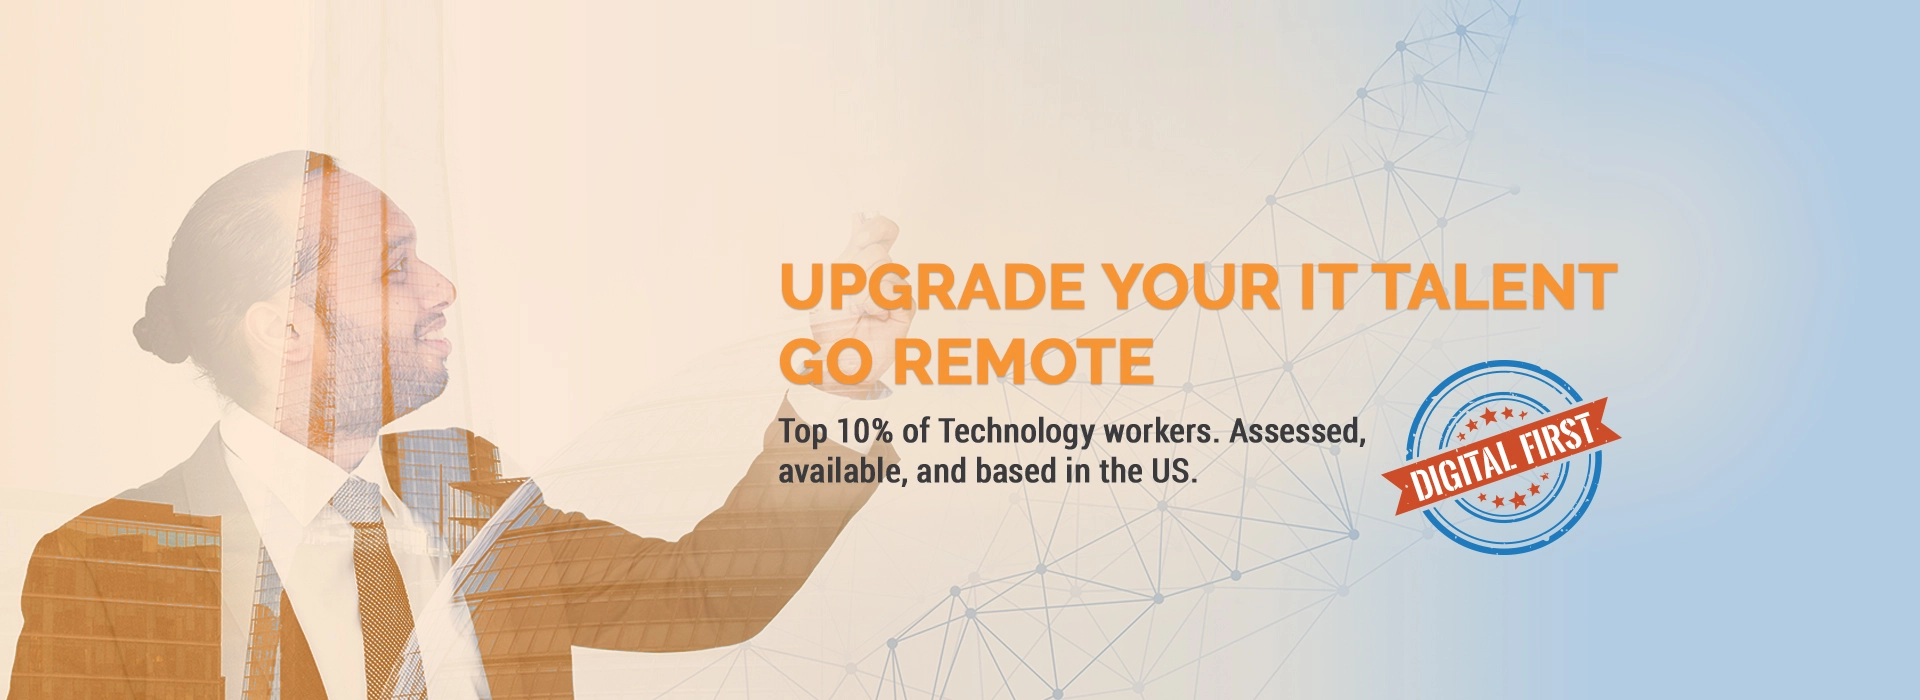 Upgrade your it Talent go remote